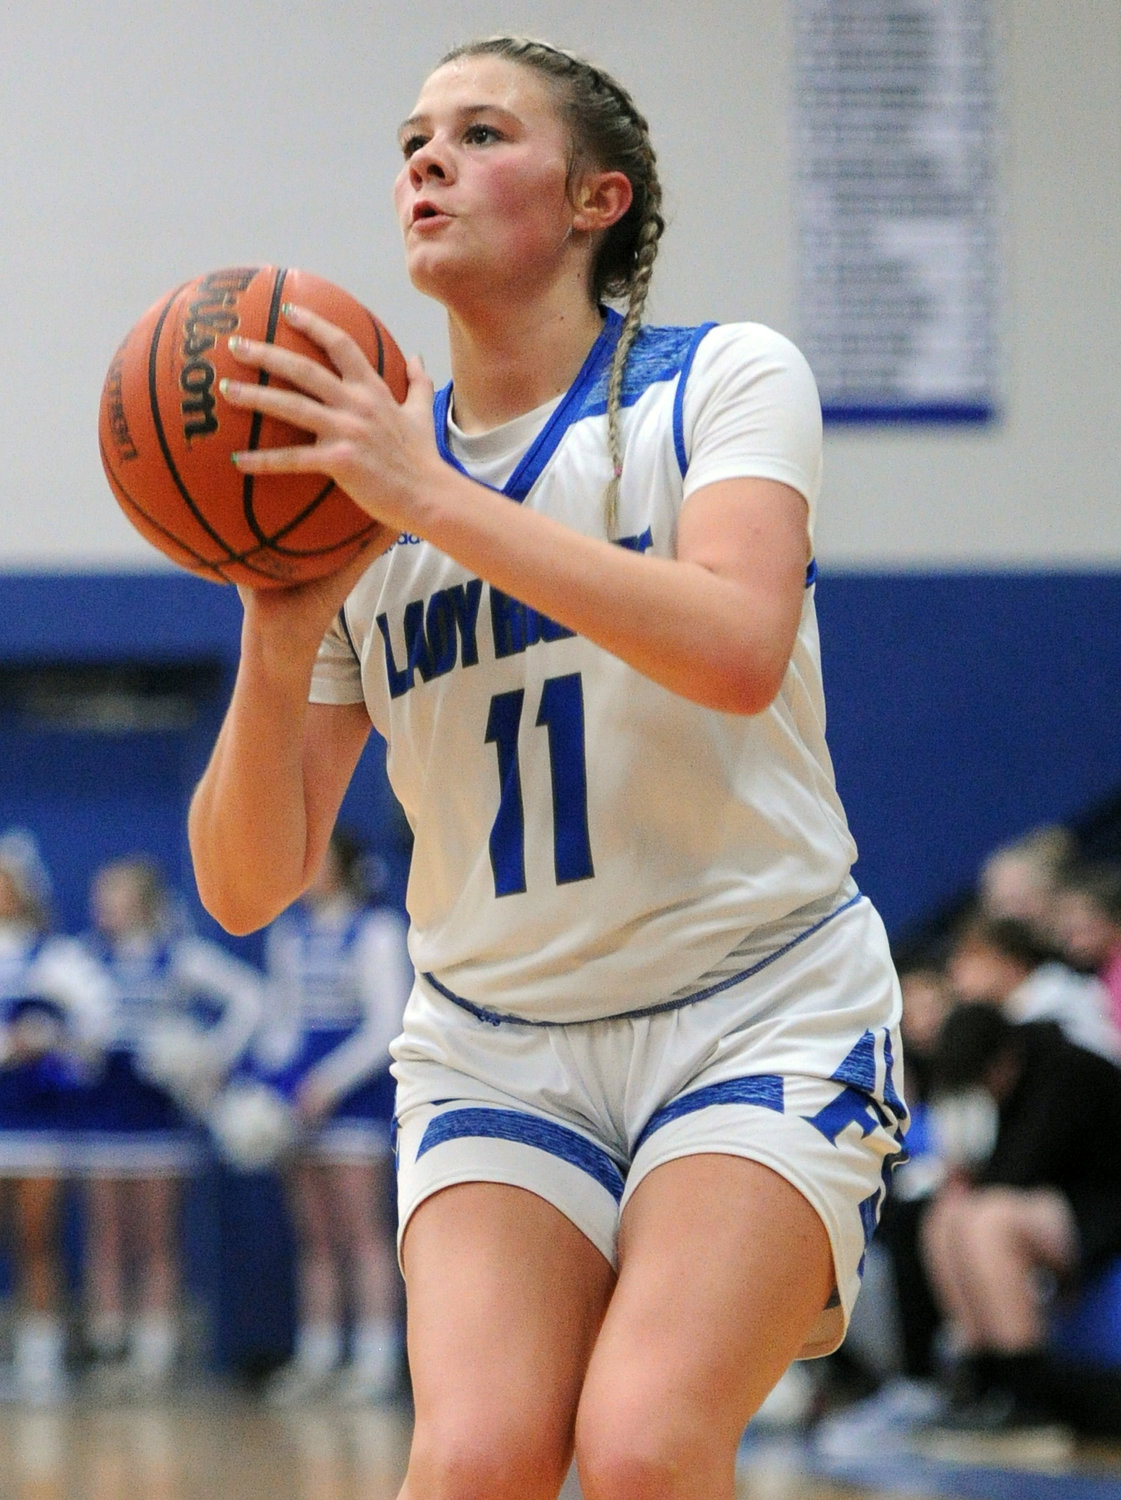 Kinslee Inlow takes aim and fires a three-pointer. She scored 10 points against the Raiderettes.